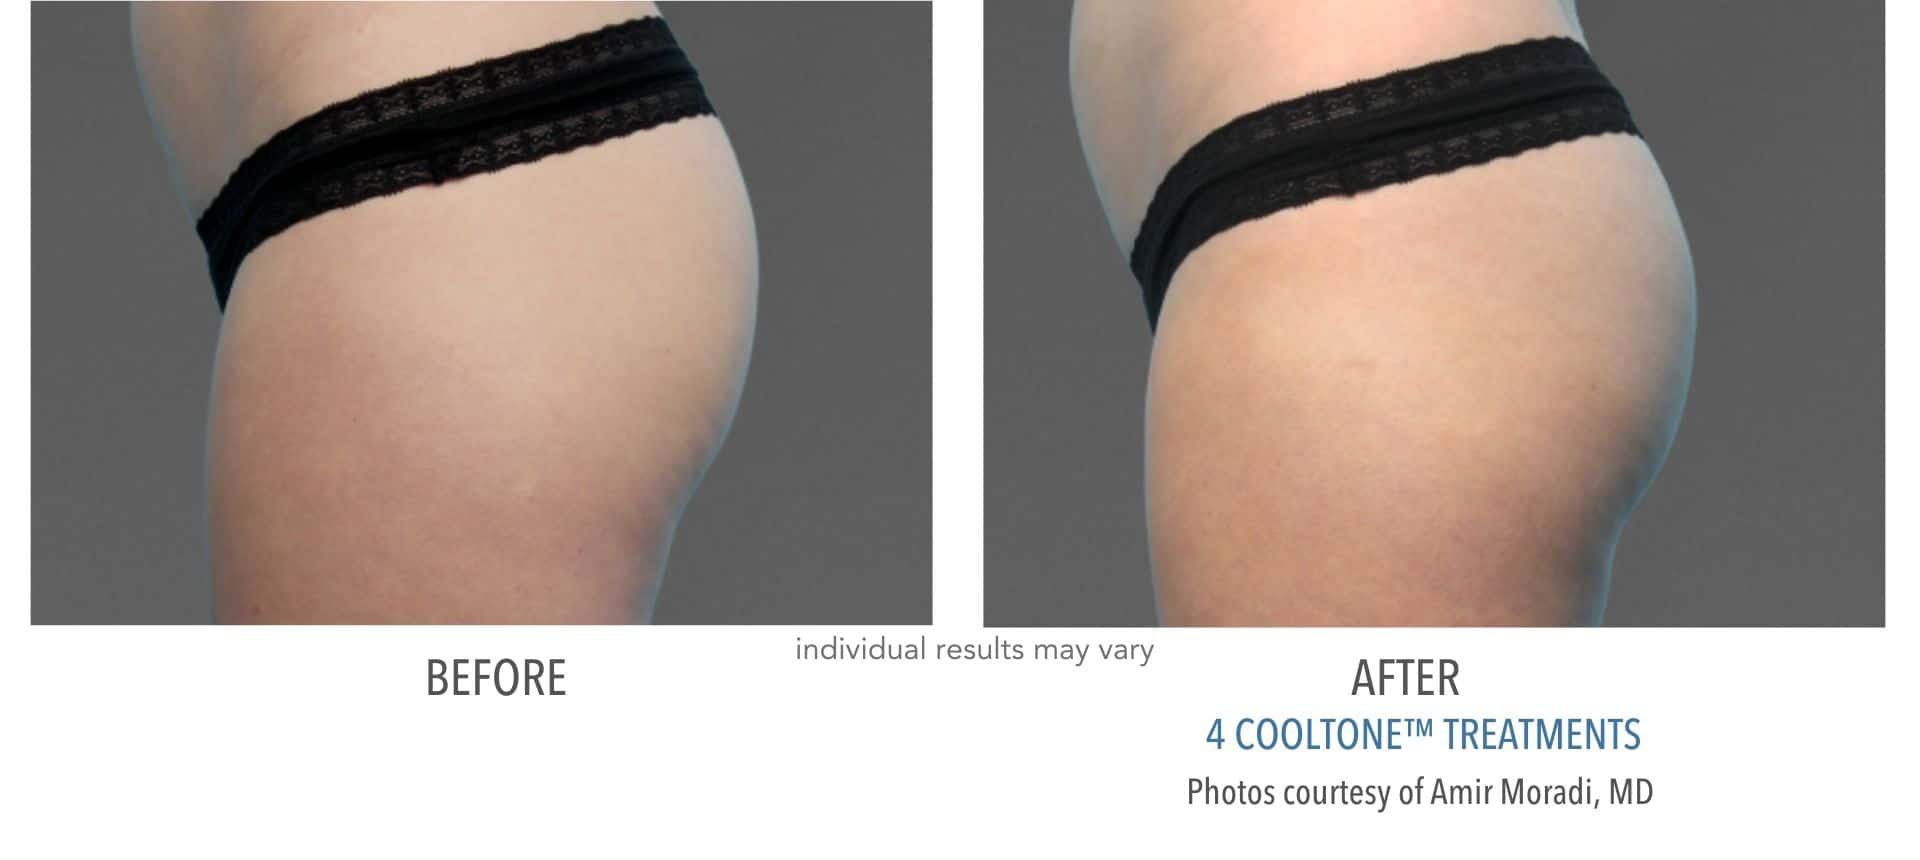 cooltone before and after results of woman's butt.